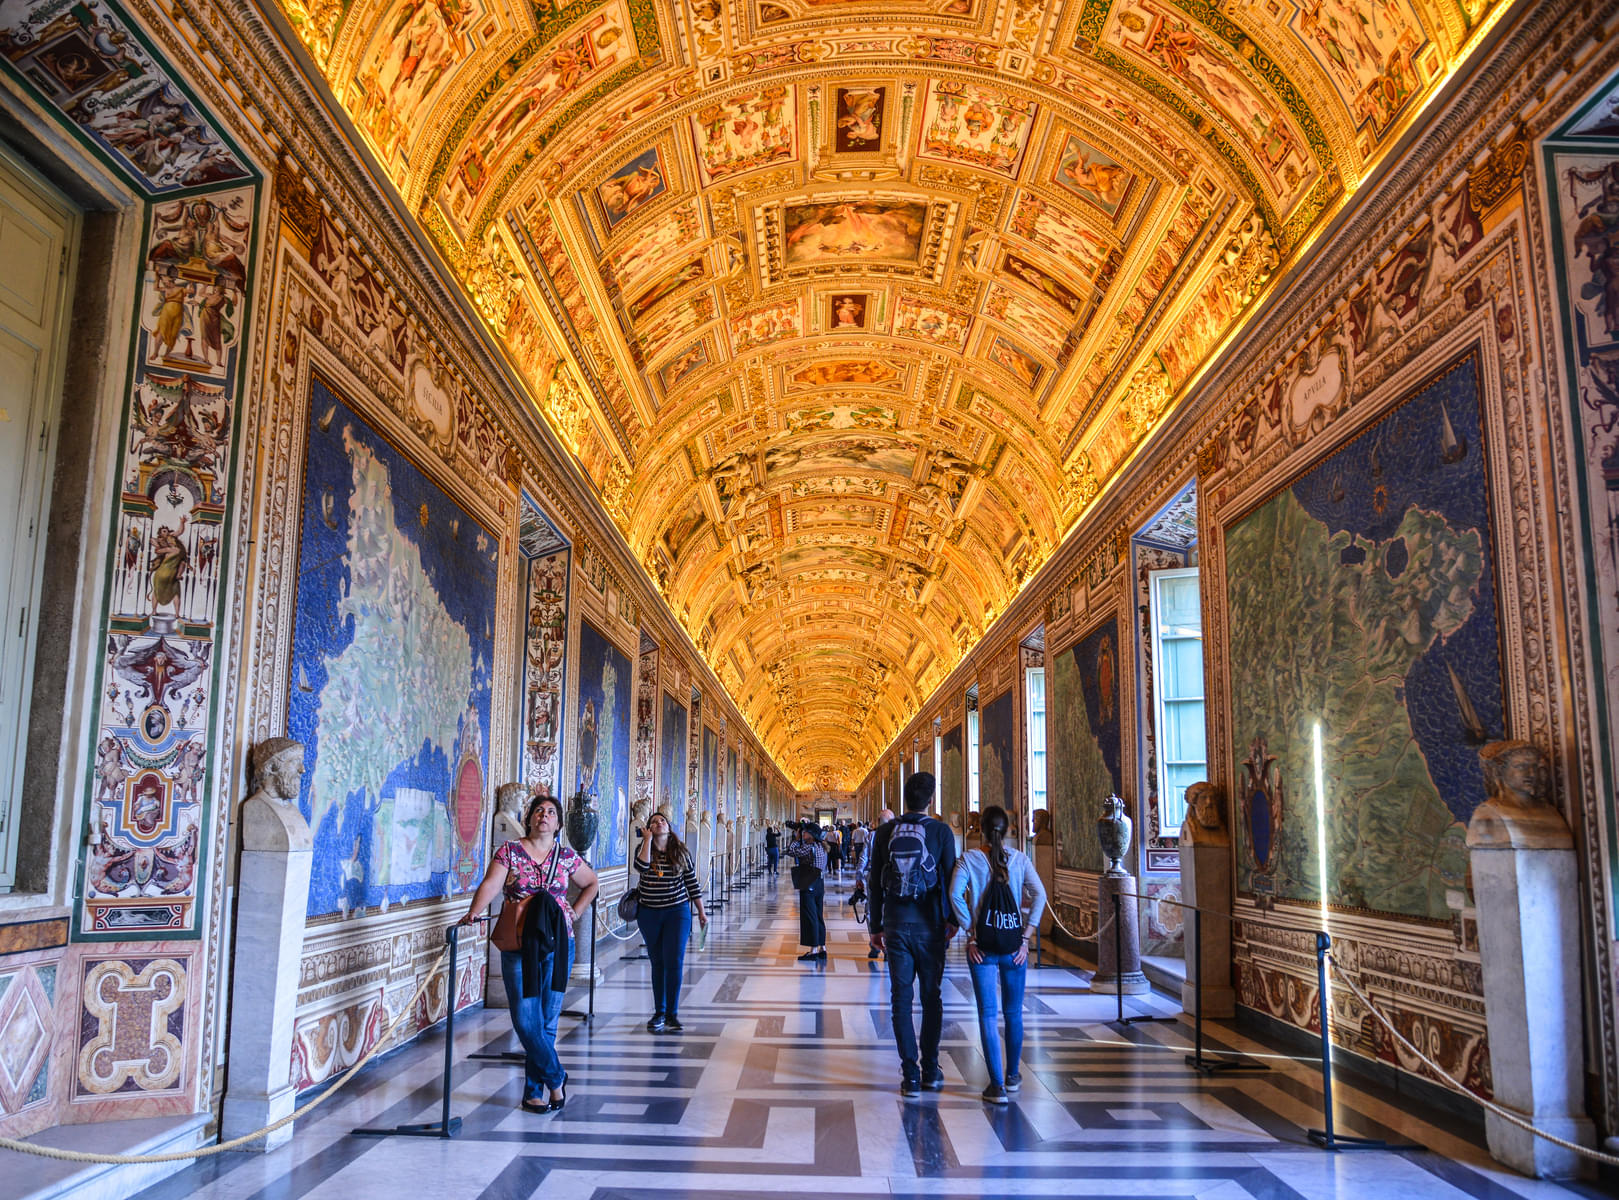 Behold the beauty and grandeur of the Vatican Museums' extraordinary artworks